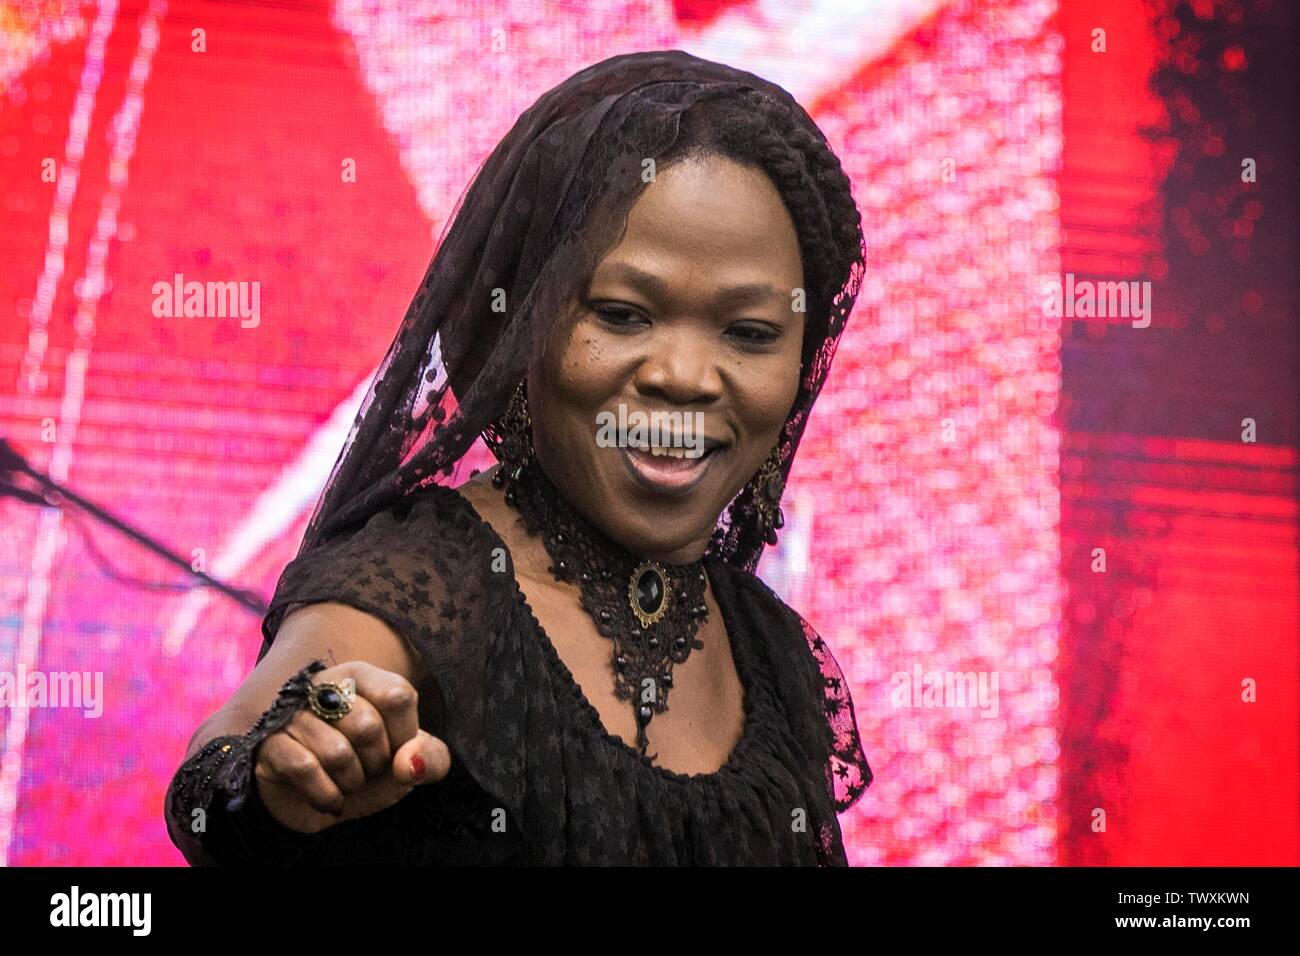 Liverpool, Merseyside, UK. 23rd June 2019. Africa Oye Music Festival.  Moonlight Benjamin performs at the fantastic Africa Oyé Festival in Liverpool;s Sefton Park. The UK’s largest free celebration of African music and culture, takes place annually in Liverpool. Beginning in 1992 as a series of small gigs in the city centre, the event has gone from strength to strength, moving to its present Sefton Park home in 2002 to cope with demand.  Credit: Cernan Elias/Alamy Live News Stock Photo